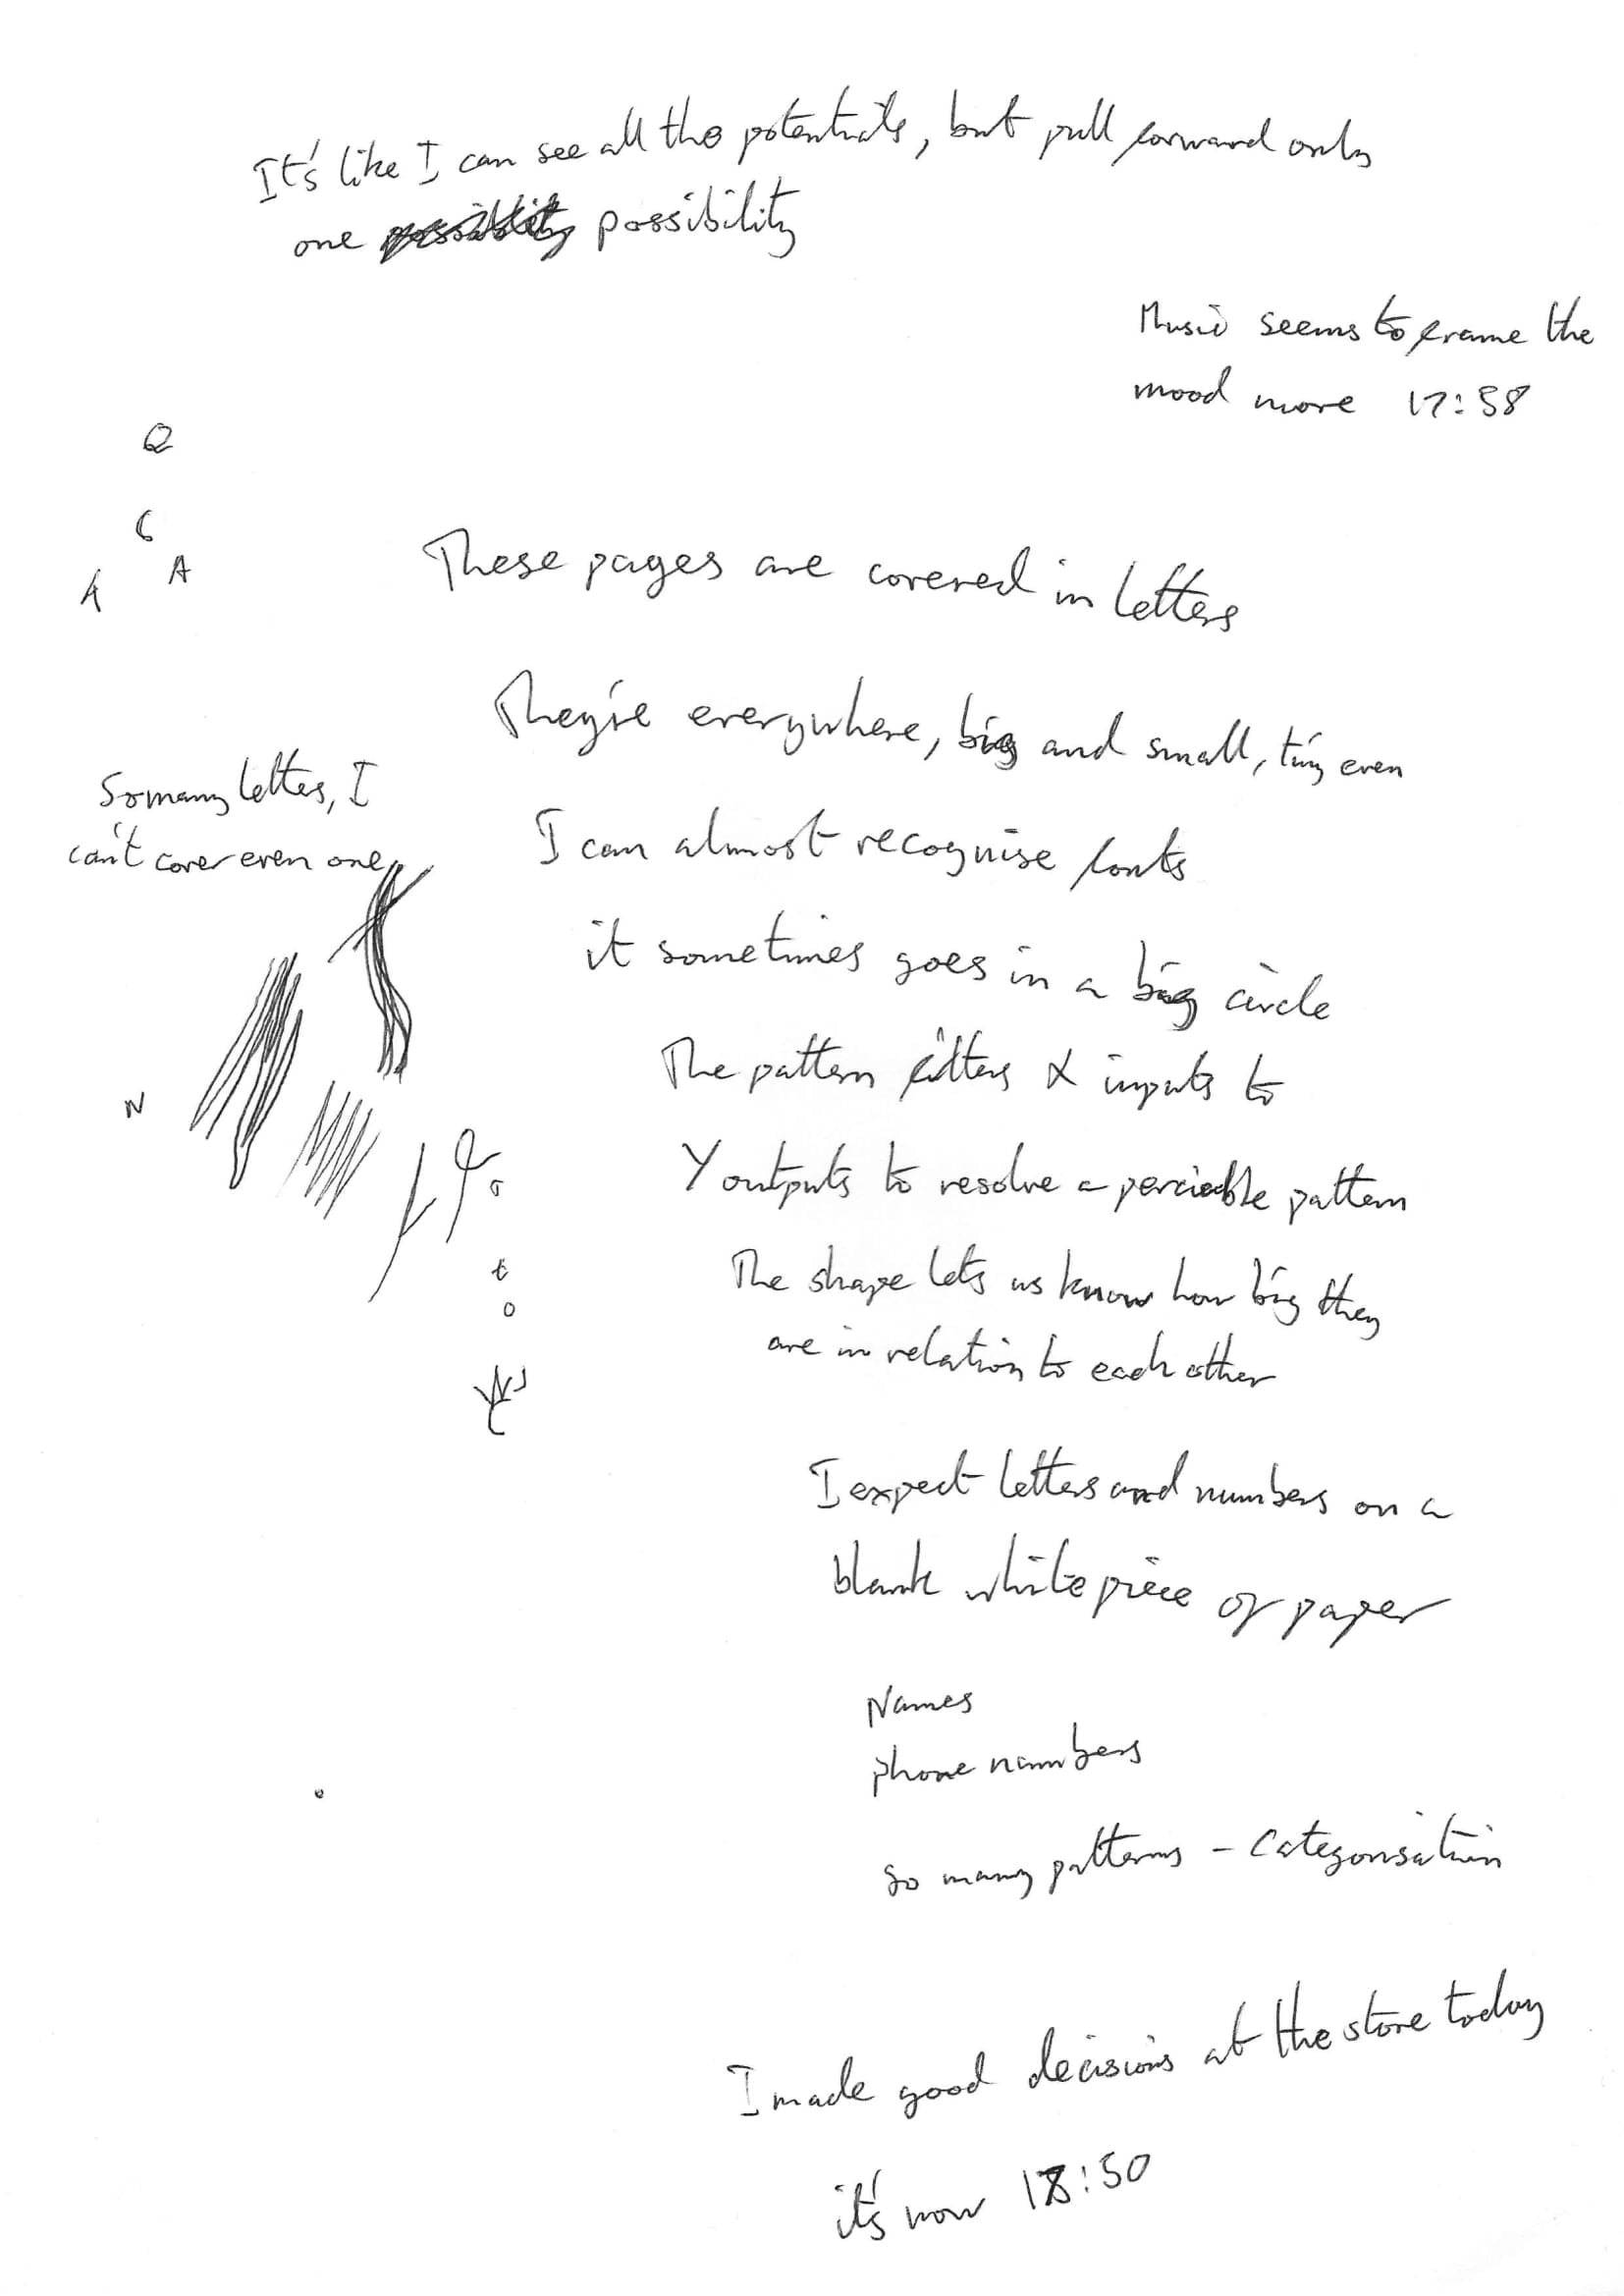 piece of paper containing handwritten notes